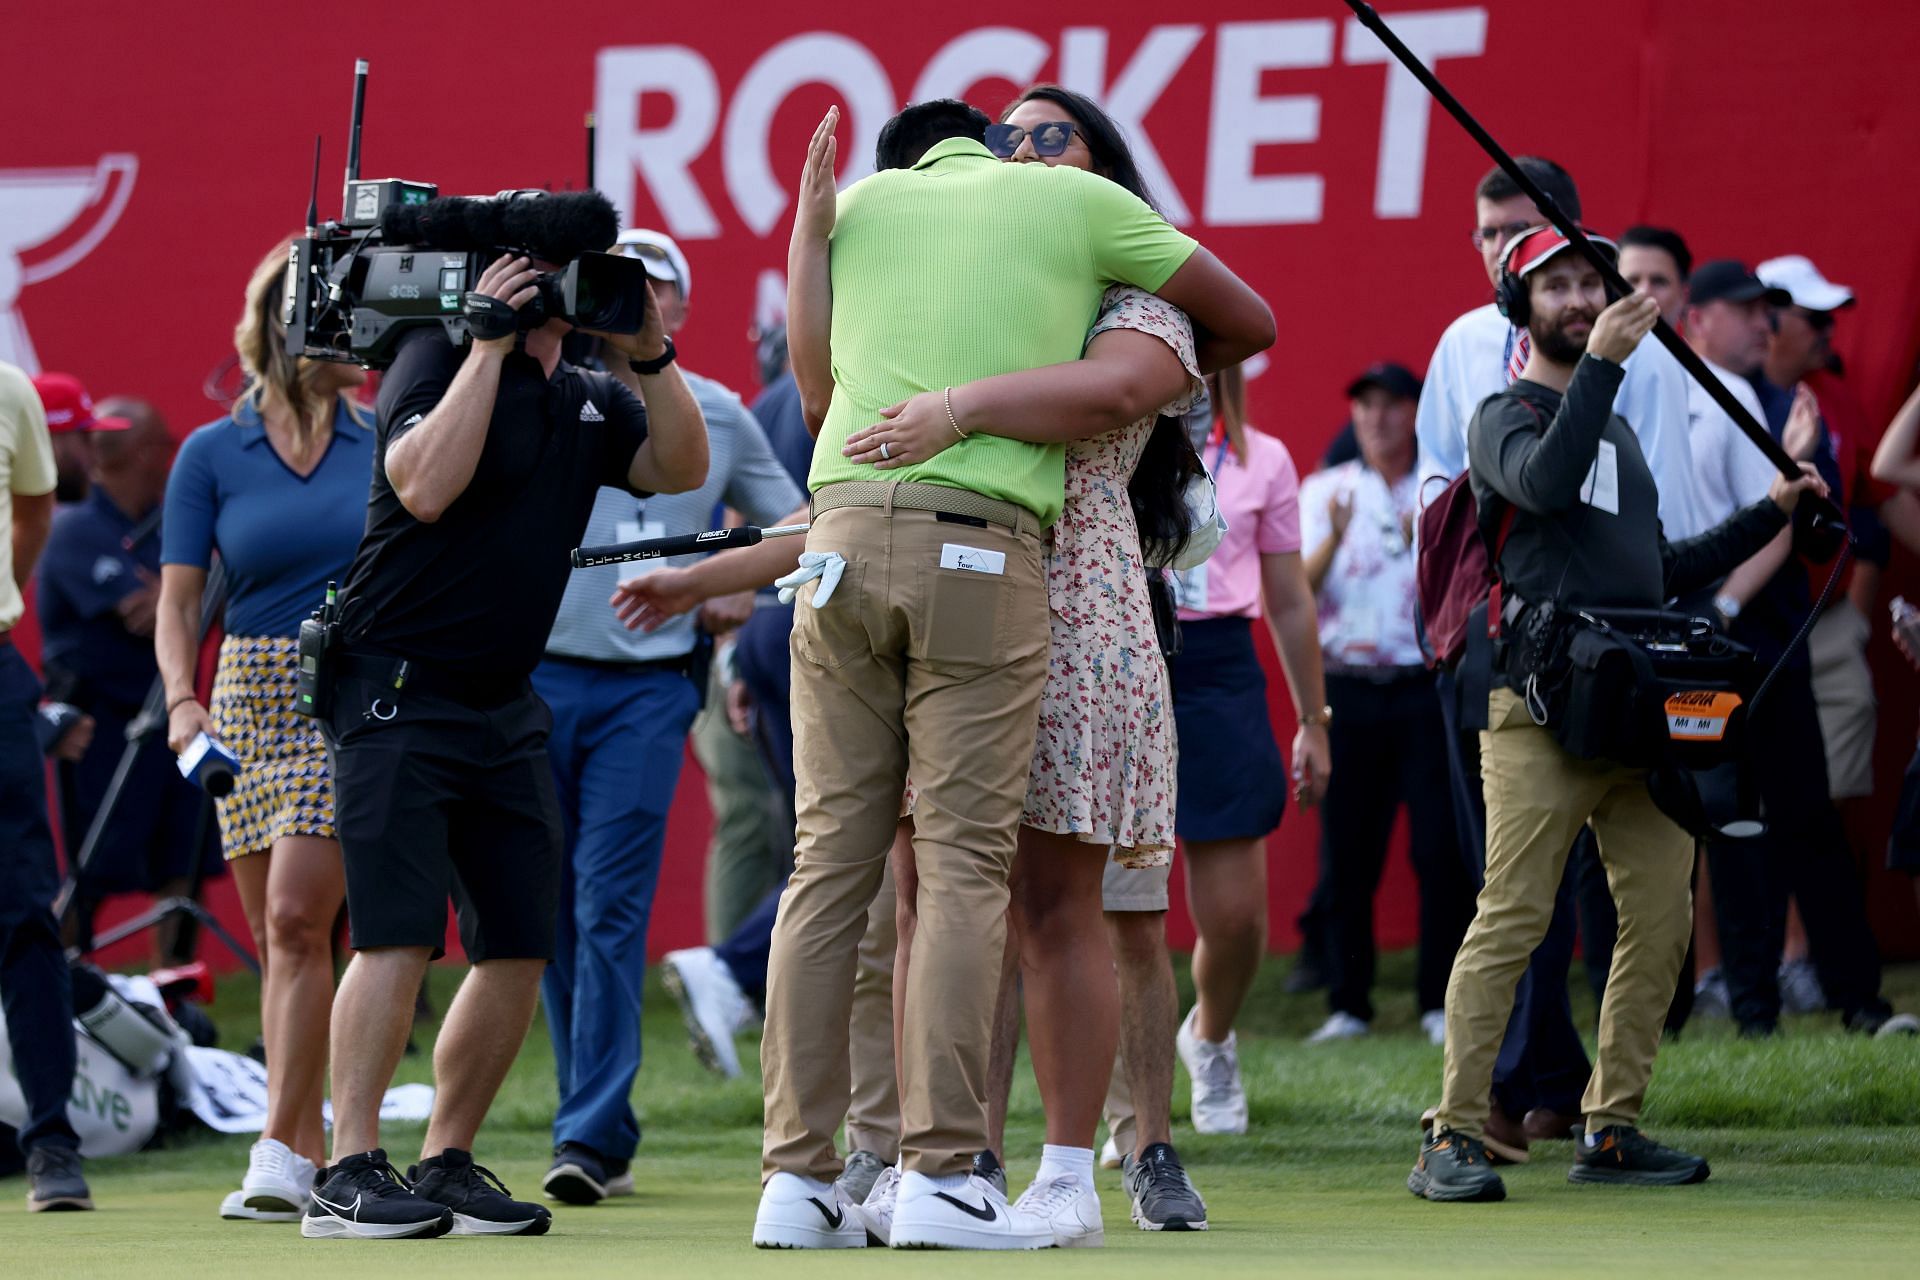 Rocket Mortgage Classic 2023 How to watch, TV schedule, streaming, golf coverage, radio, and more